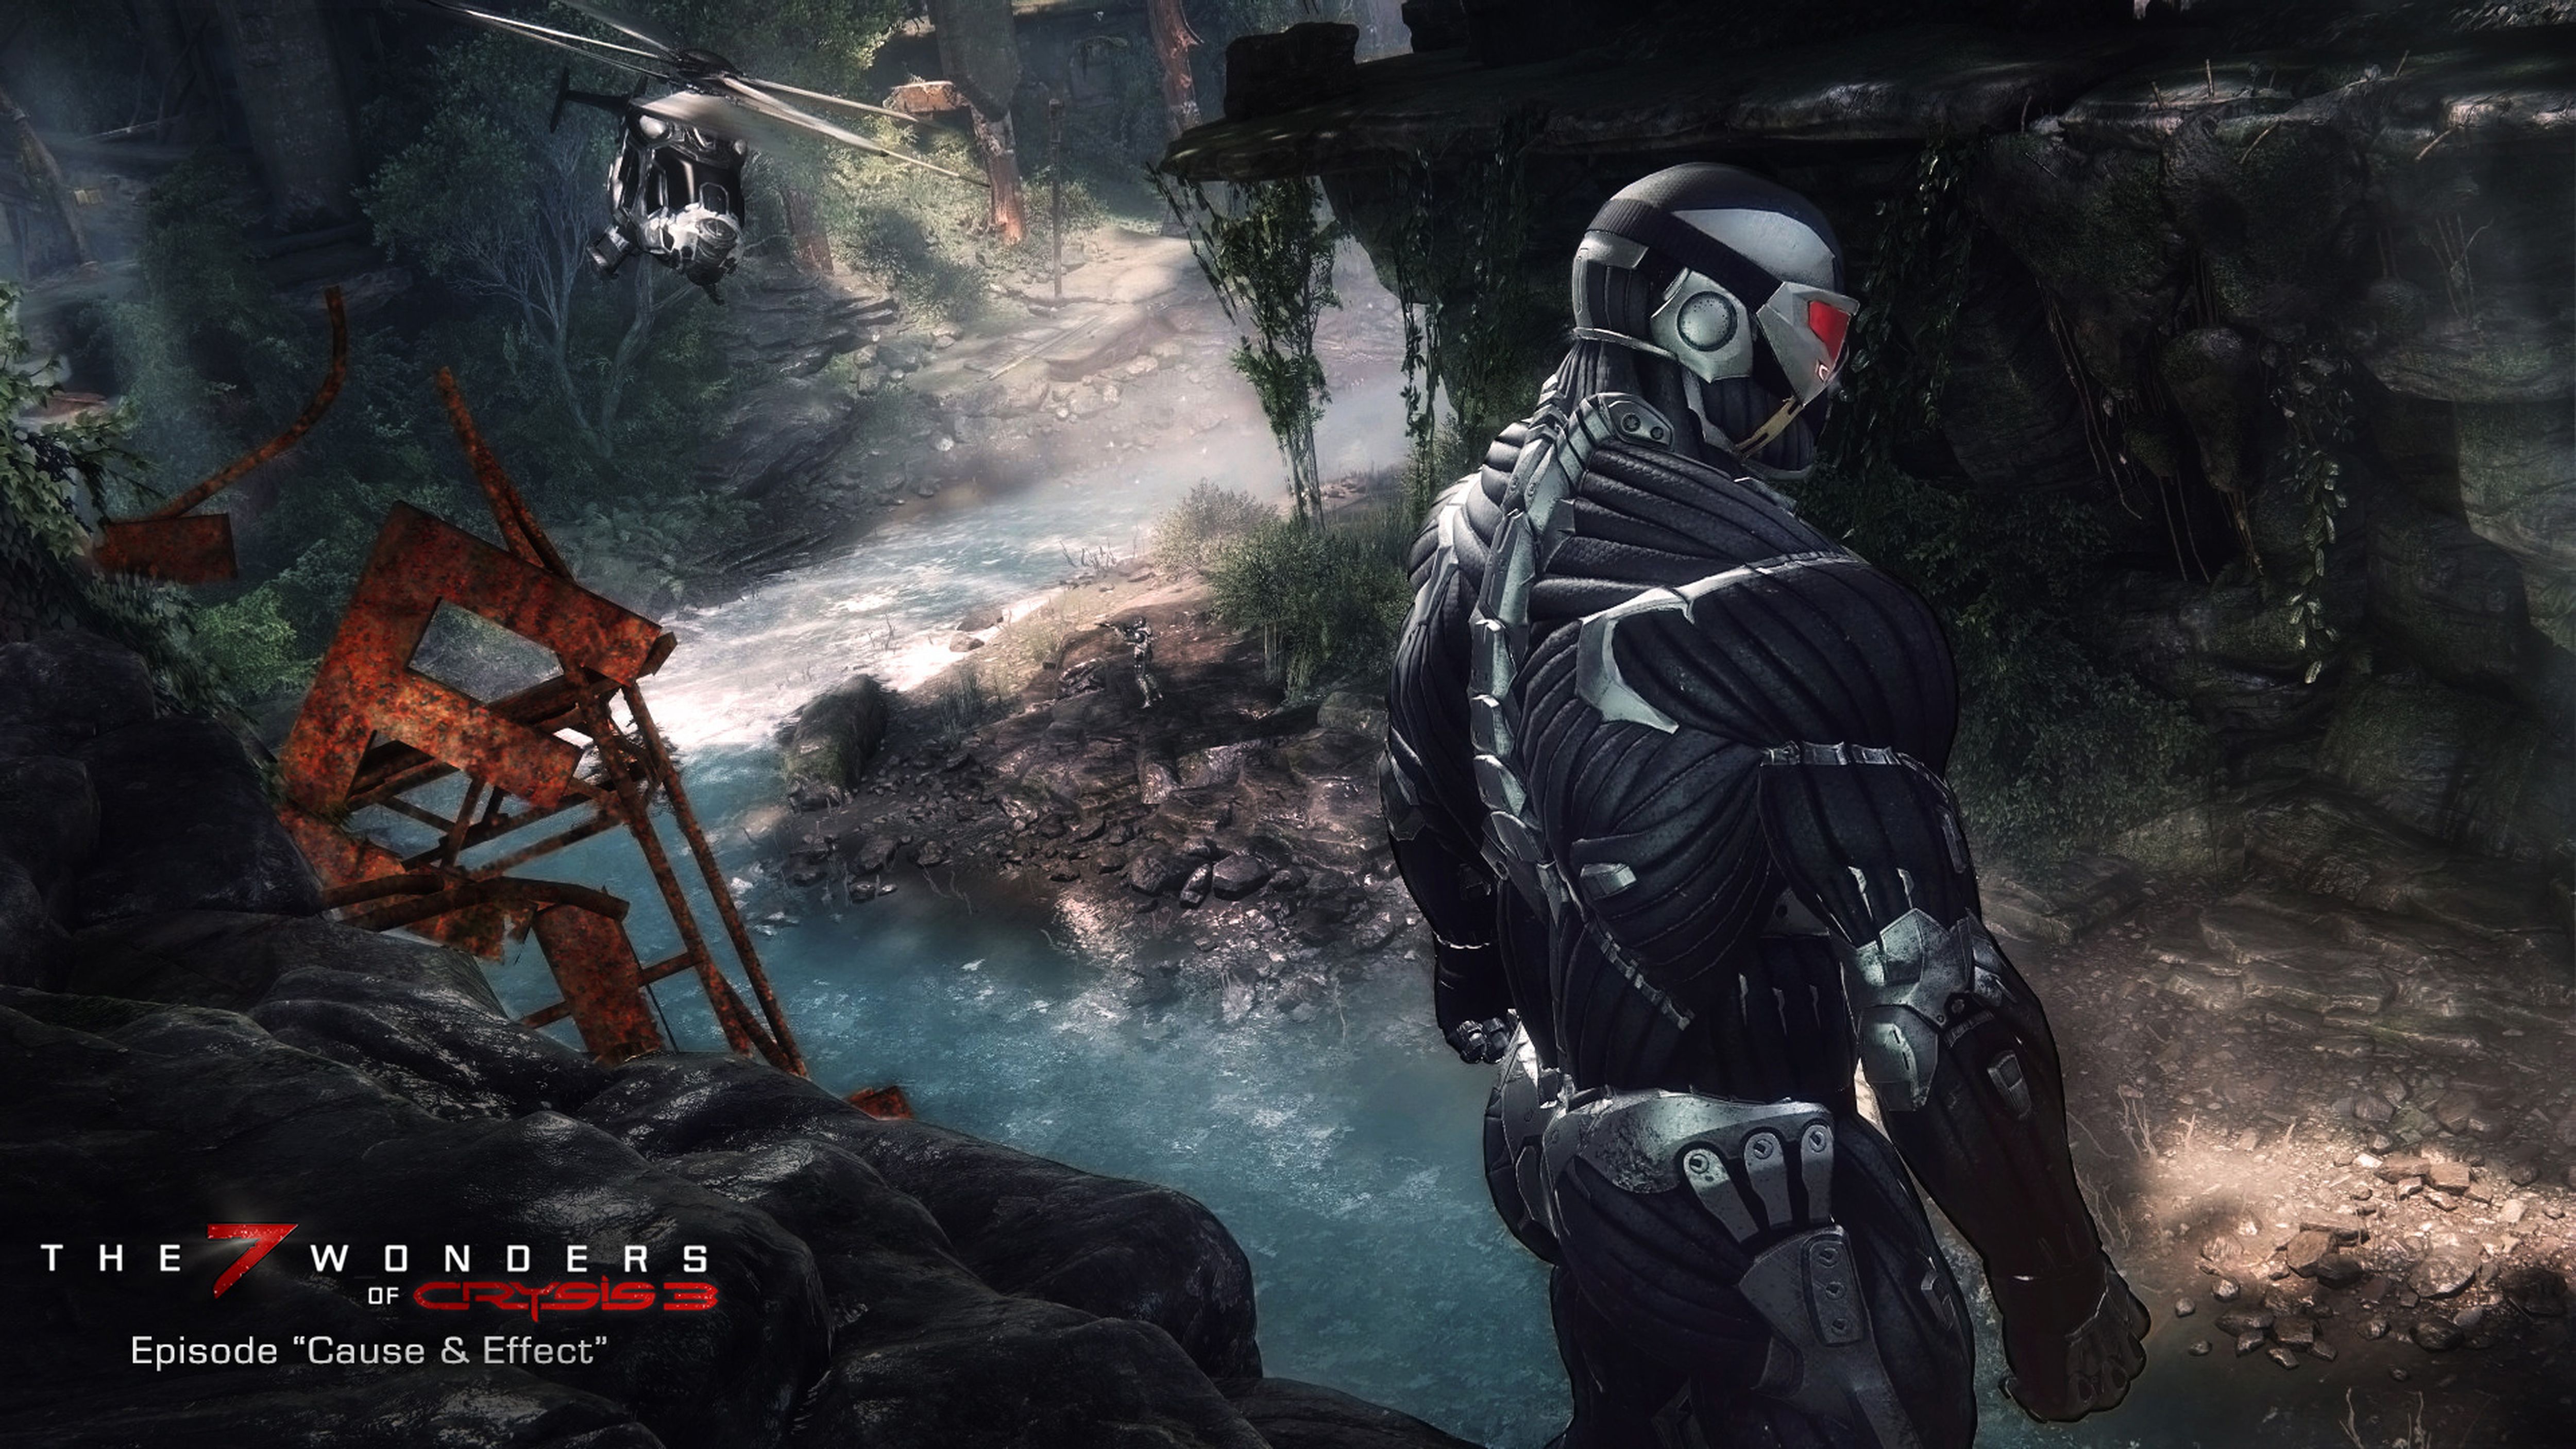 Crysis 3 4k Ultra HD Wallpaper And Background Image 5000x2812 ID 382420